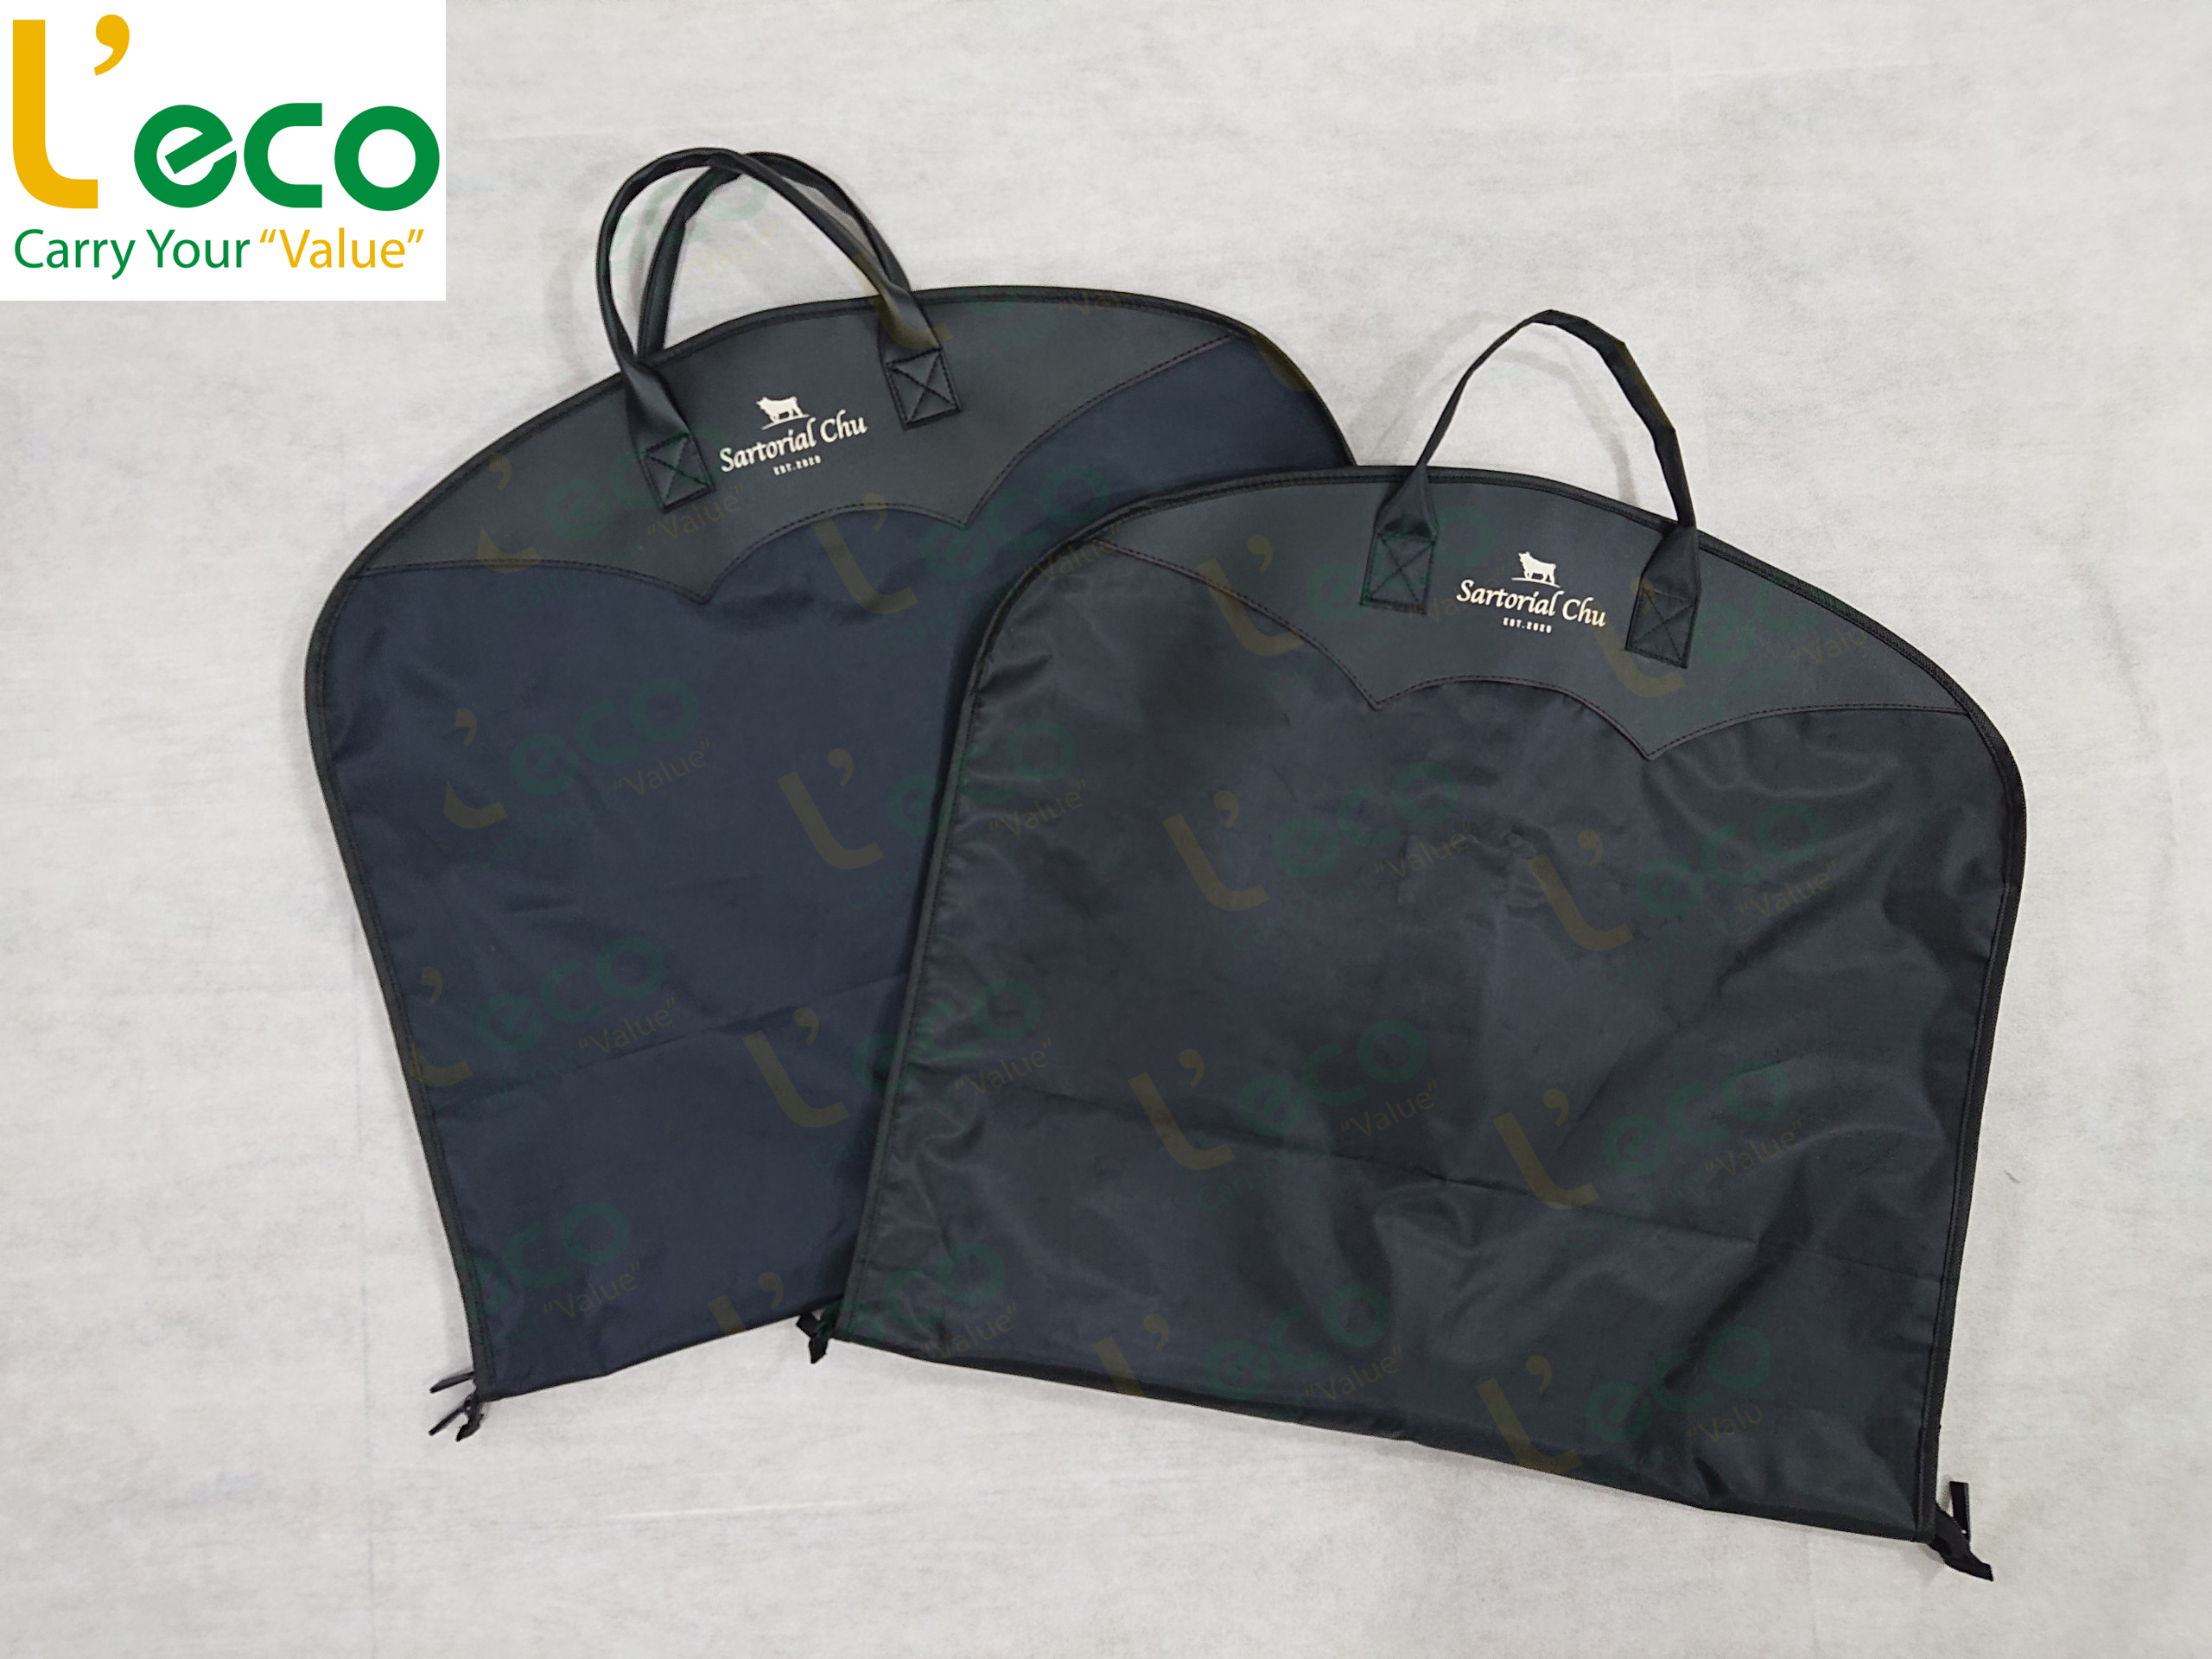 Why and how to choose a garment bag?